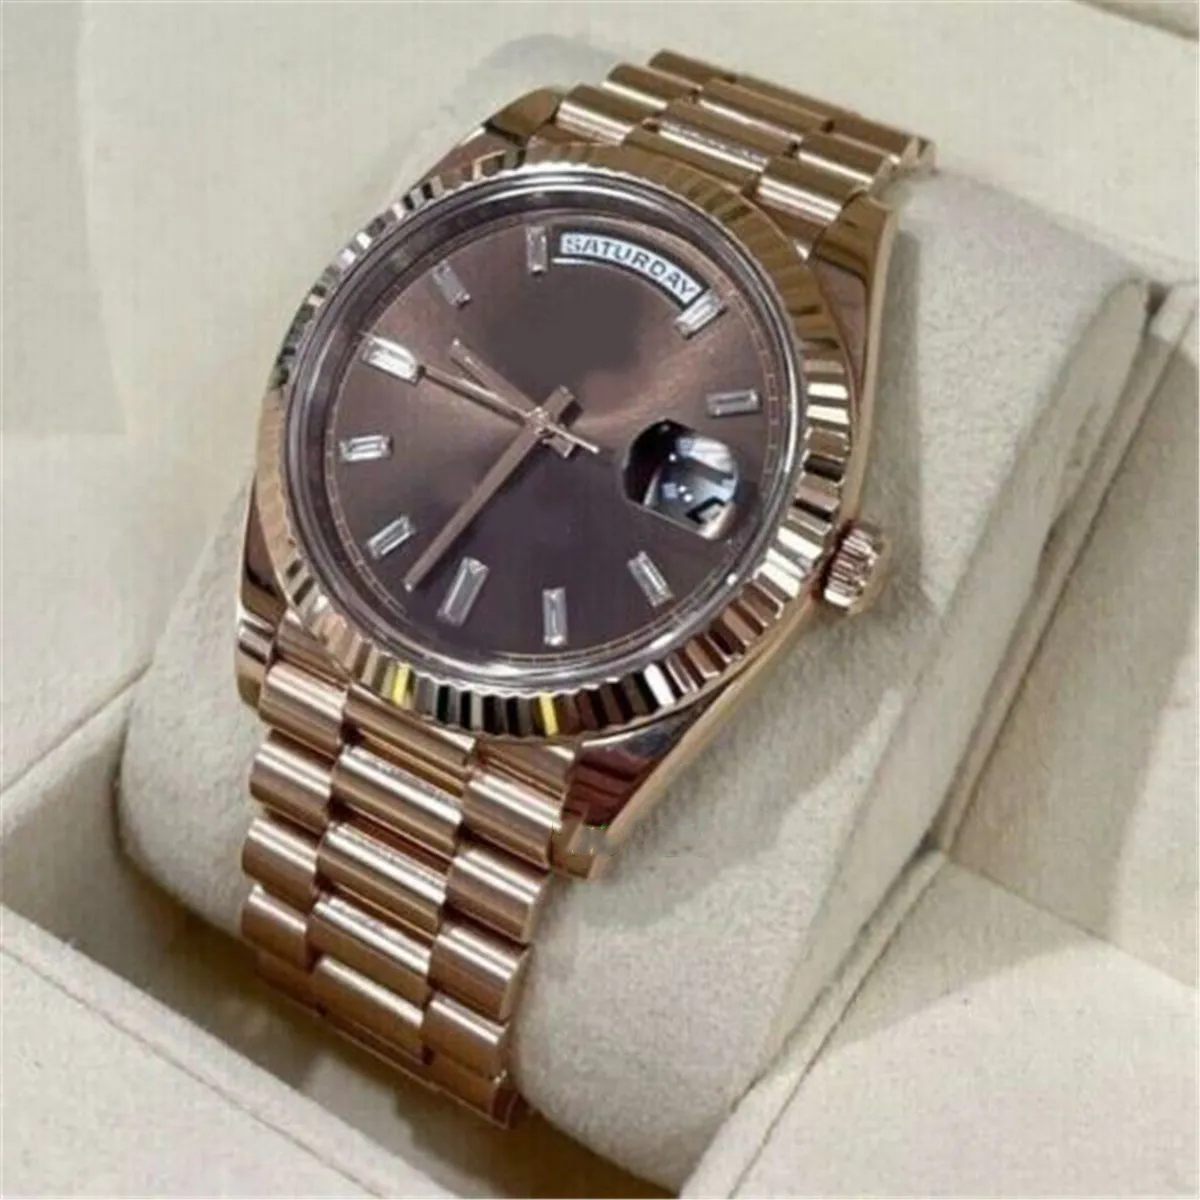 

With original box Luxury Wristwatch BRAND New Day-Date 41mm 18K Everose Gold 228235 Chocolate Baguette BOX/PAPERS MINT, Style 1 original box+watch